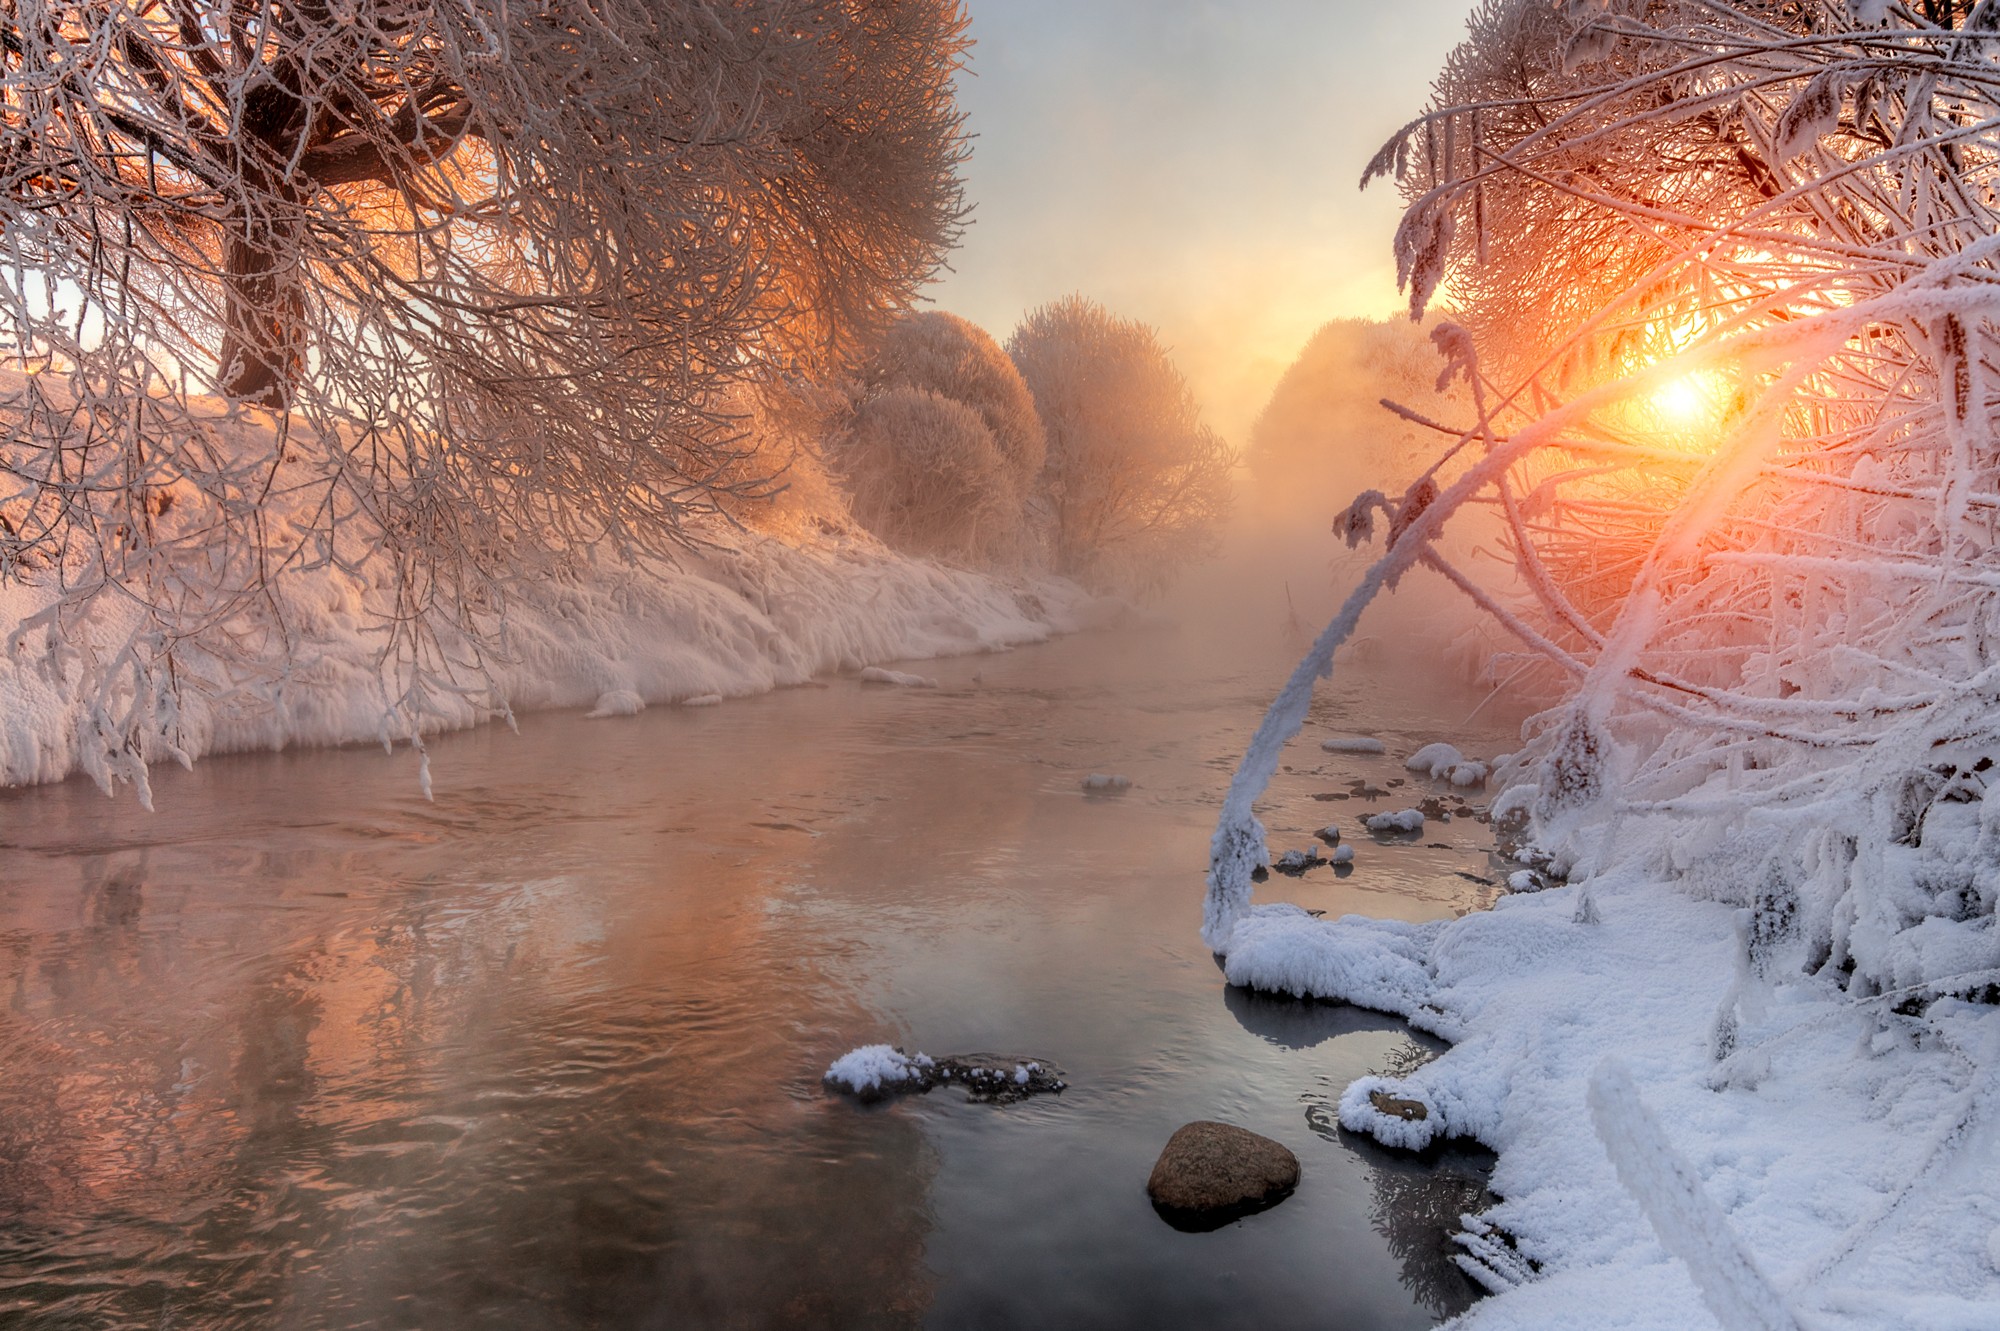 General 2000x1331 river snow sunlight winter cold frost outdoors trees water